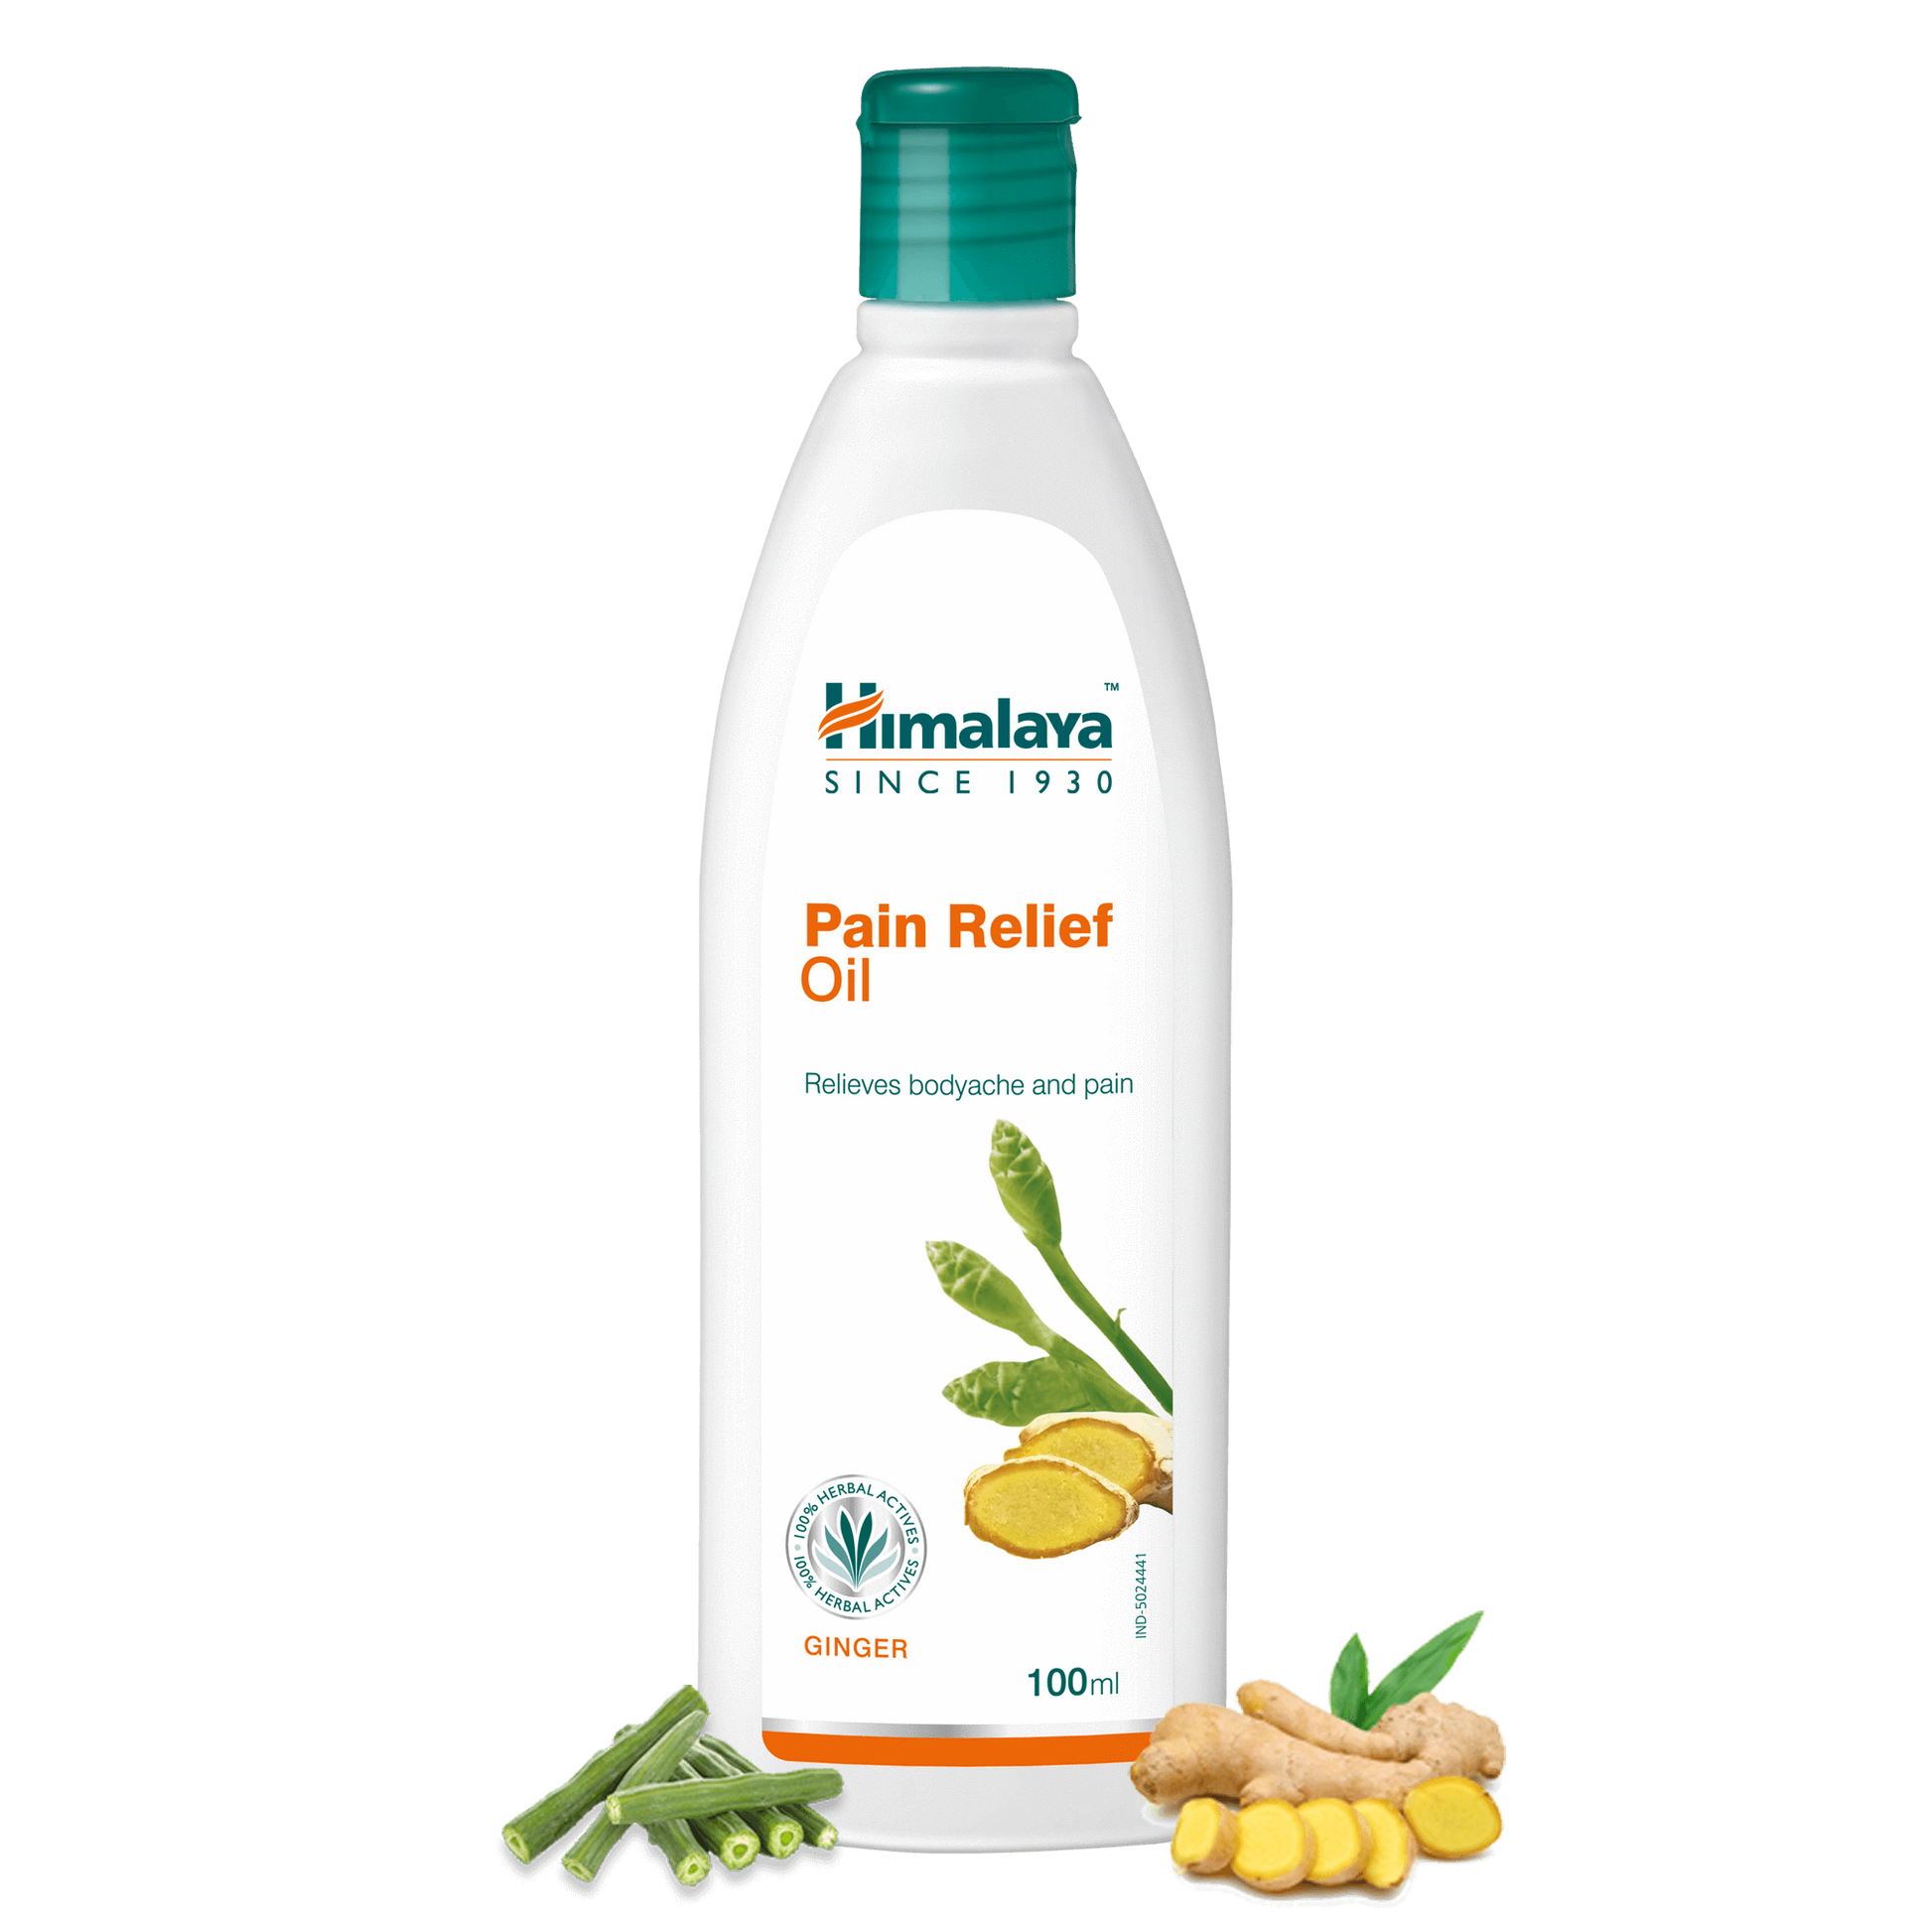 Shop Himalaya Pain Relief Oil 100ml at price 110.00 from Himalaya Online - Ayush Care